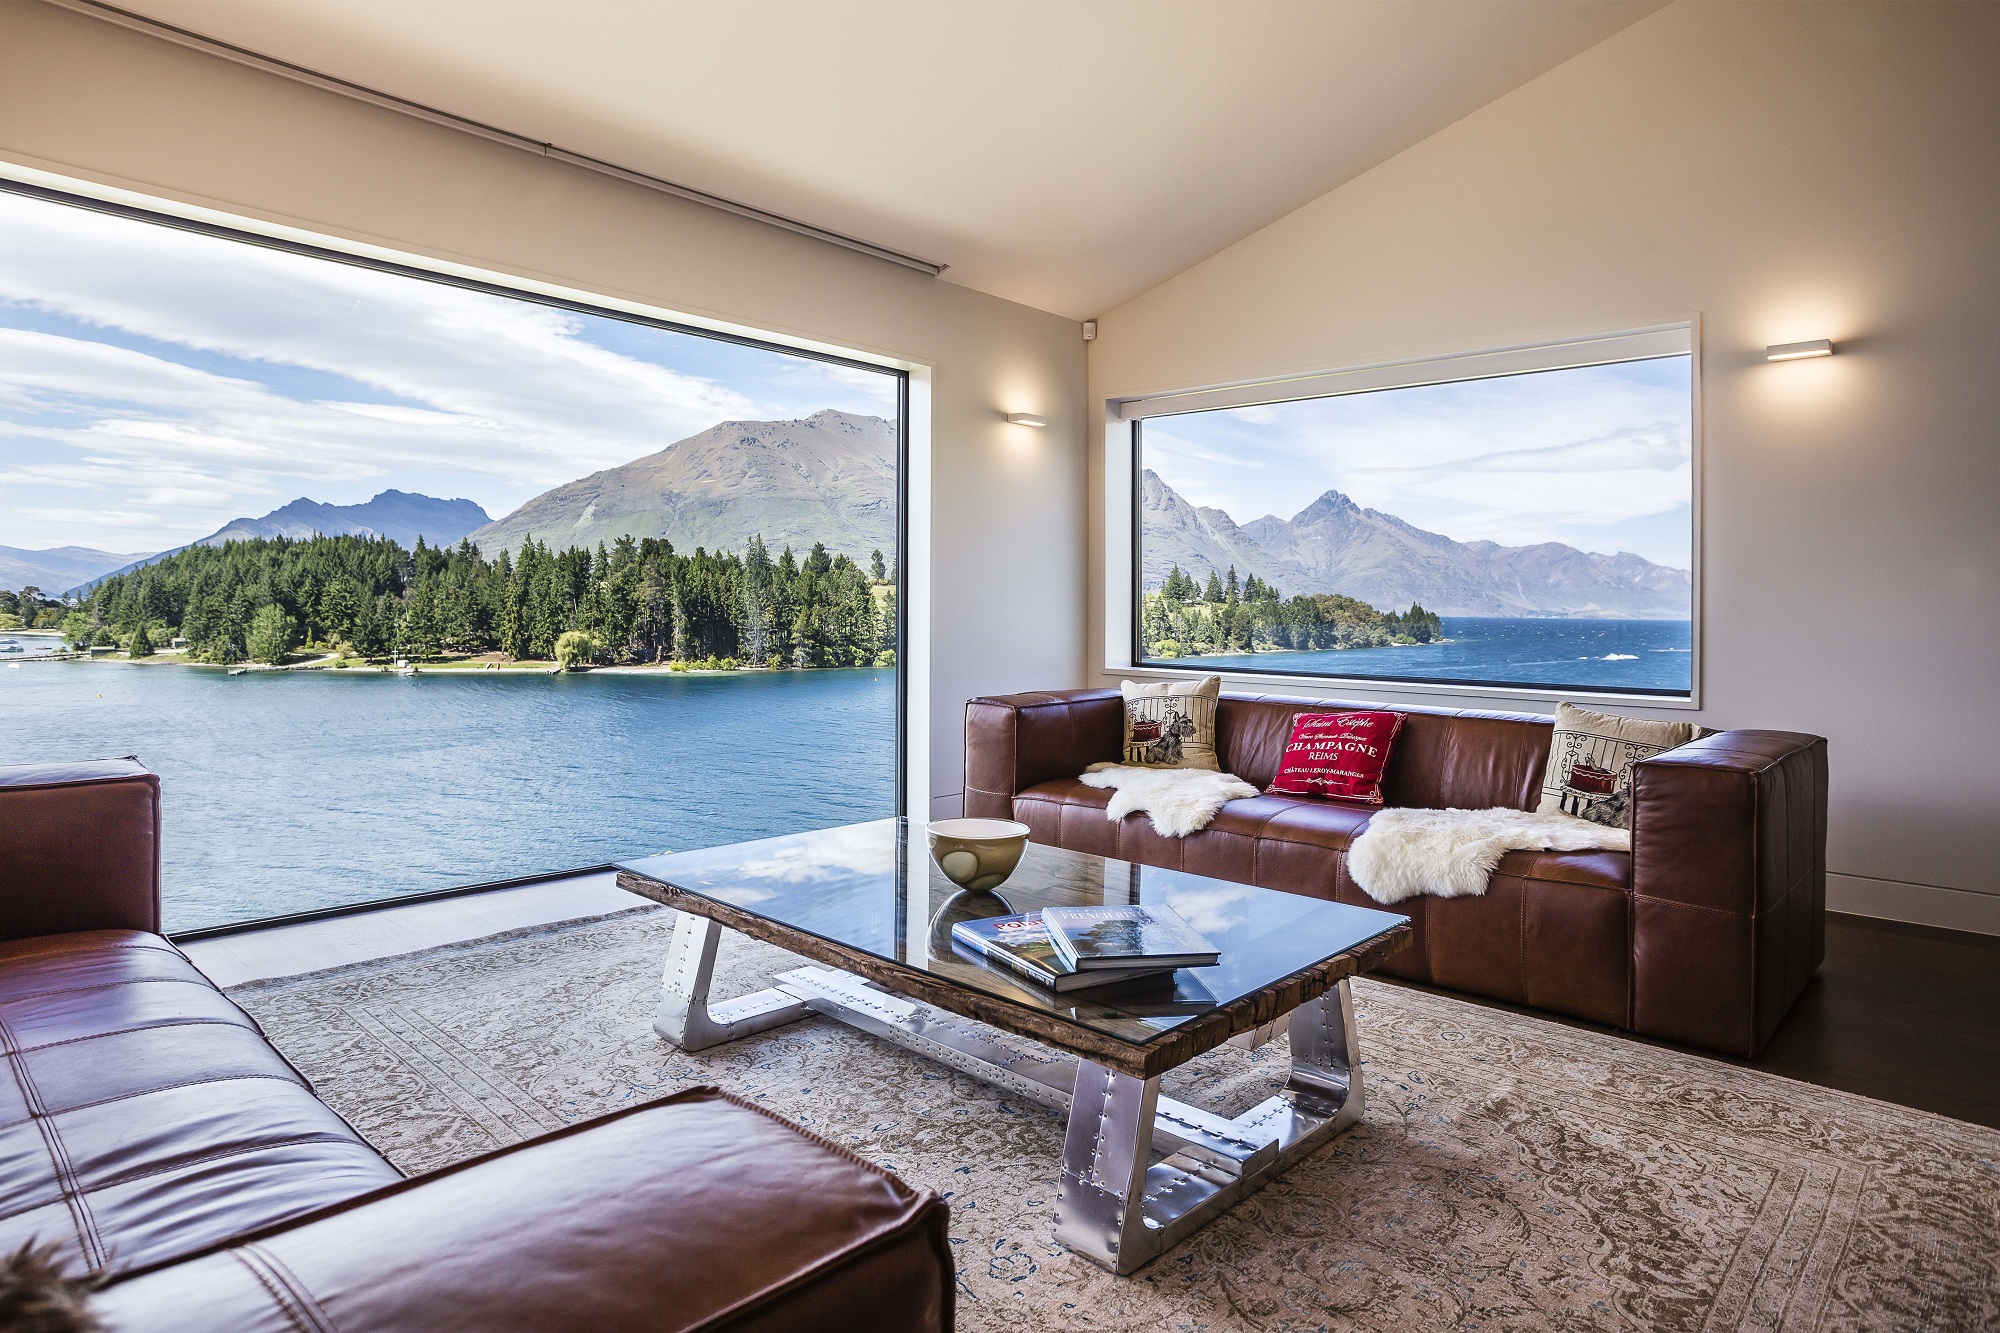 Lake View House Queenstown